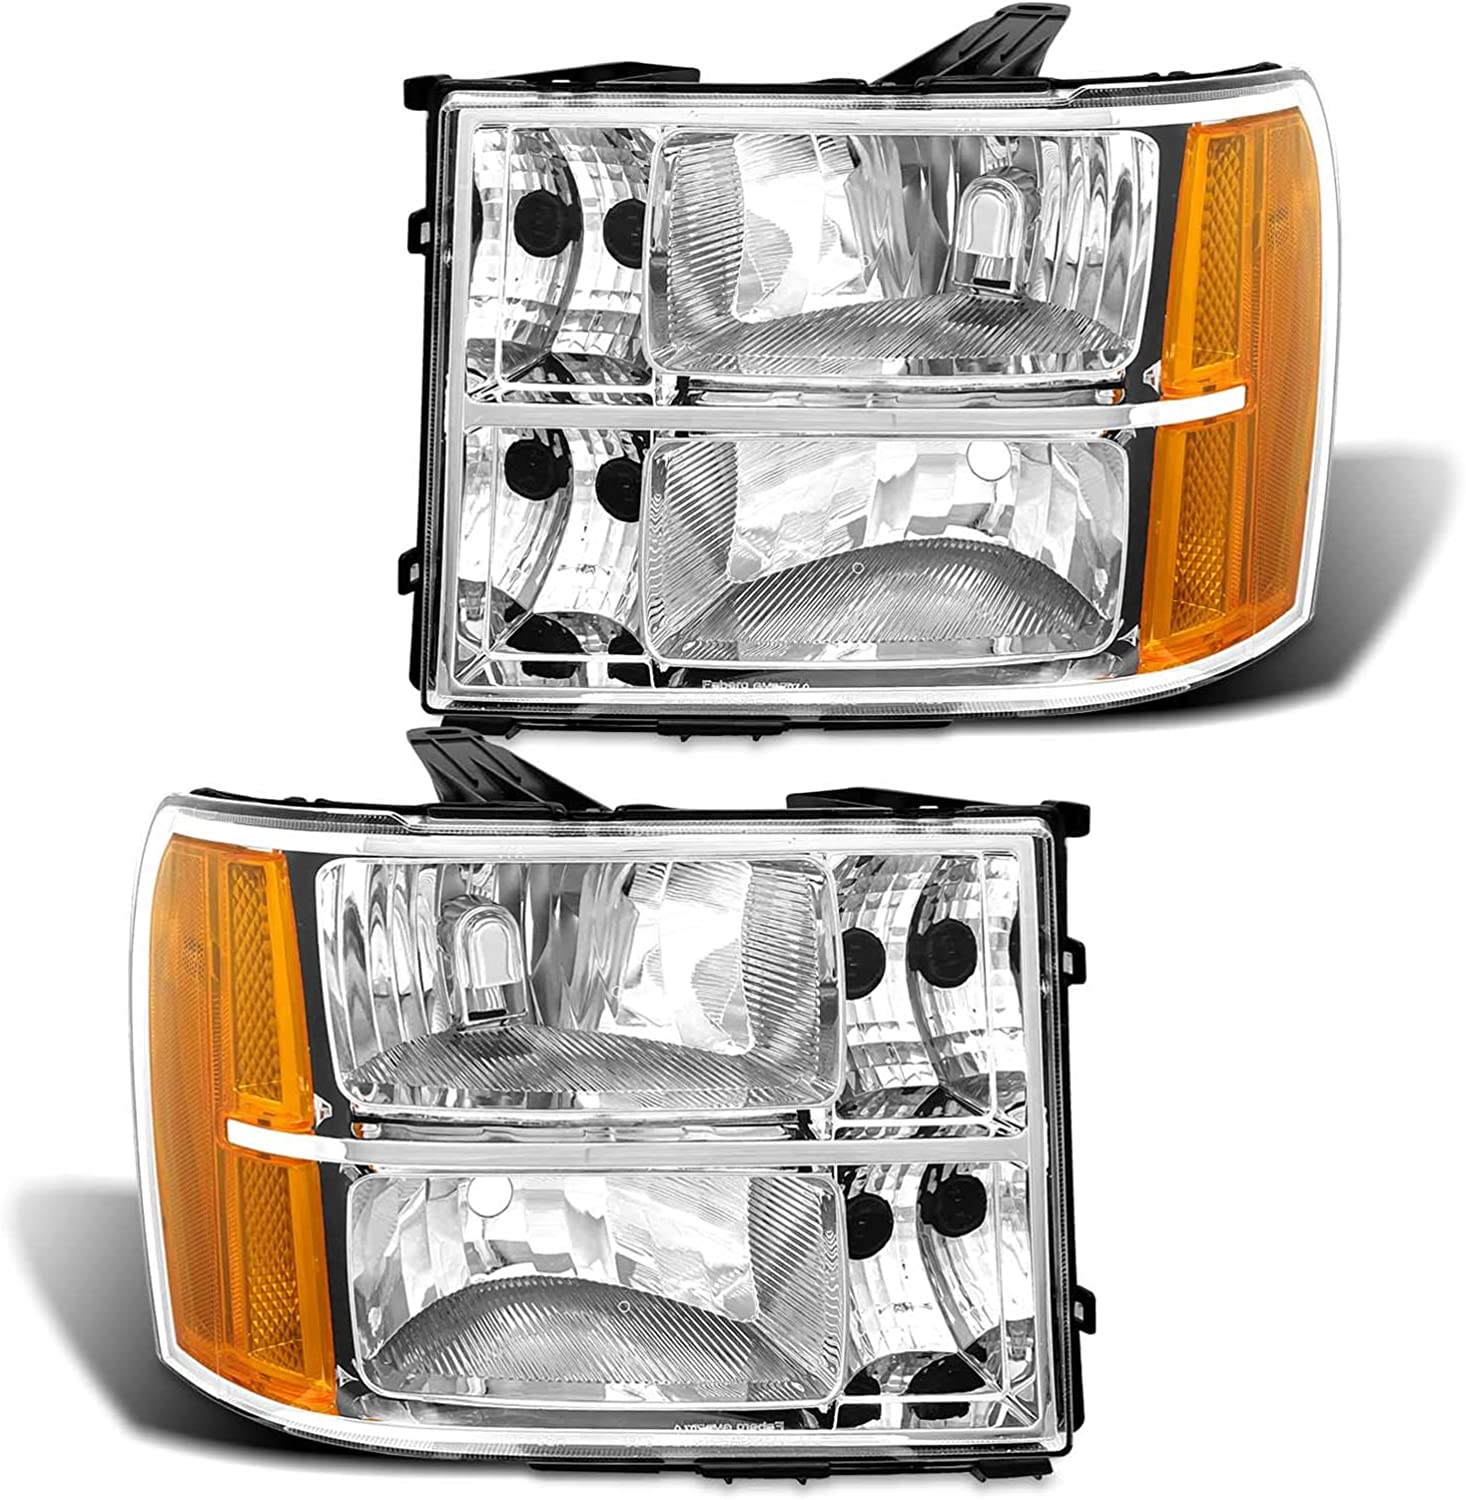 ADCARLIGHTS 2007-2014 Sierra Headlight Assembly Compatible with 2007-2014  GMC Sierra 1500 / 07-14 GMC Sierra 2500HD 3500HD Chrome Housing with Amber 